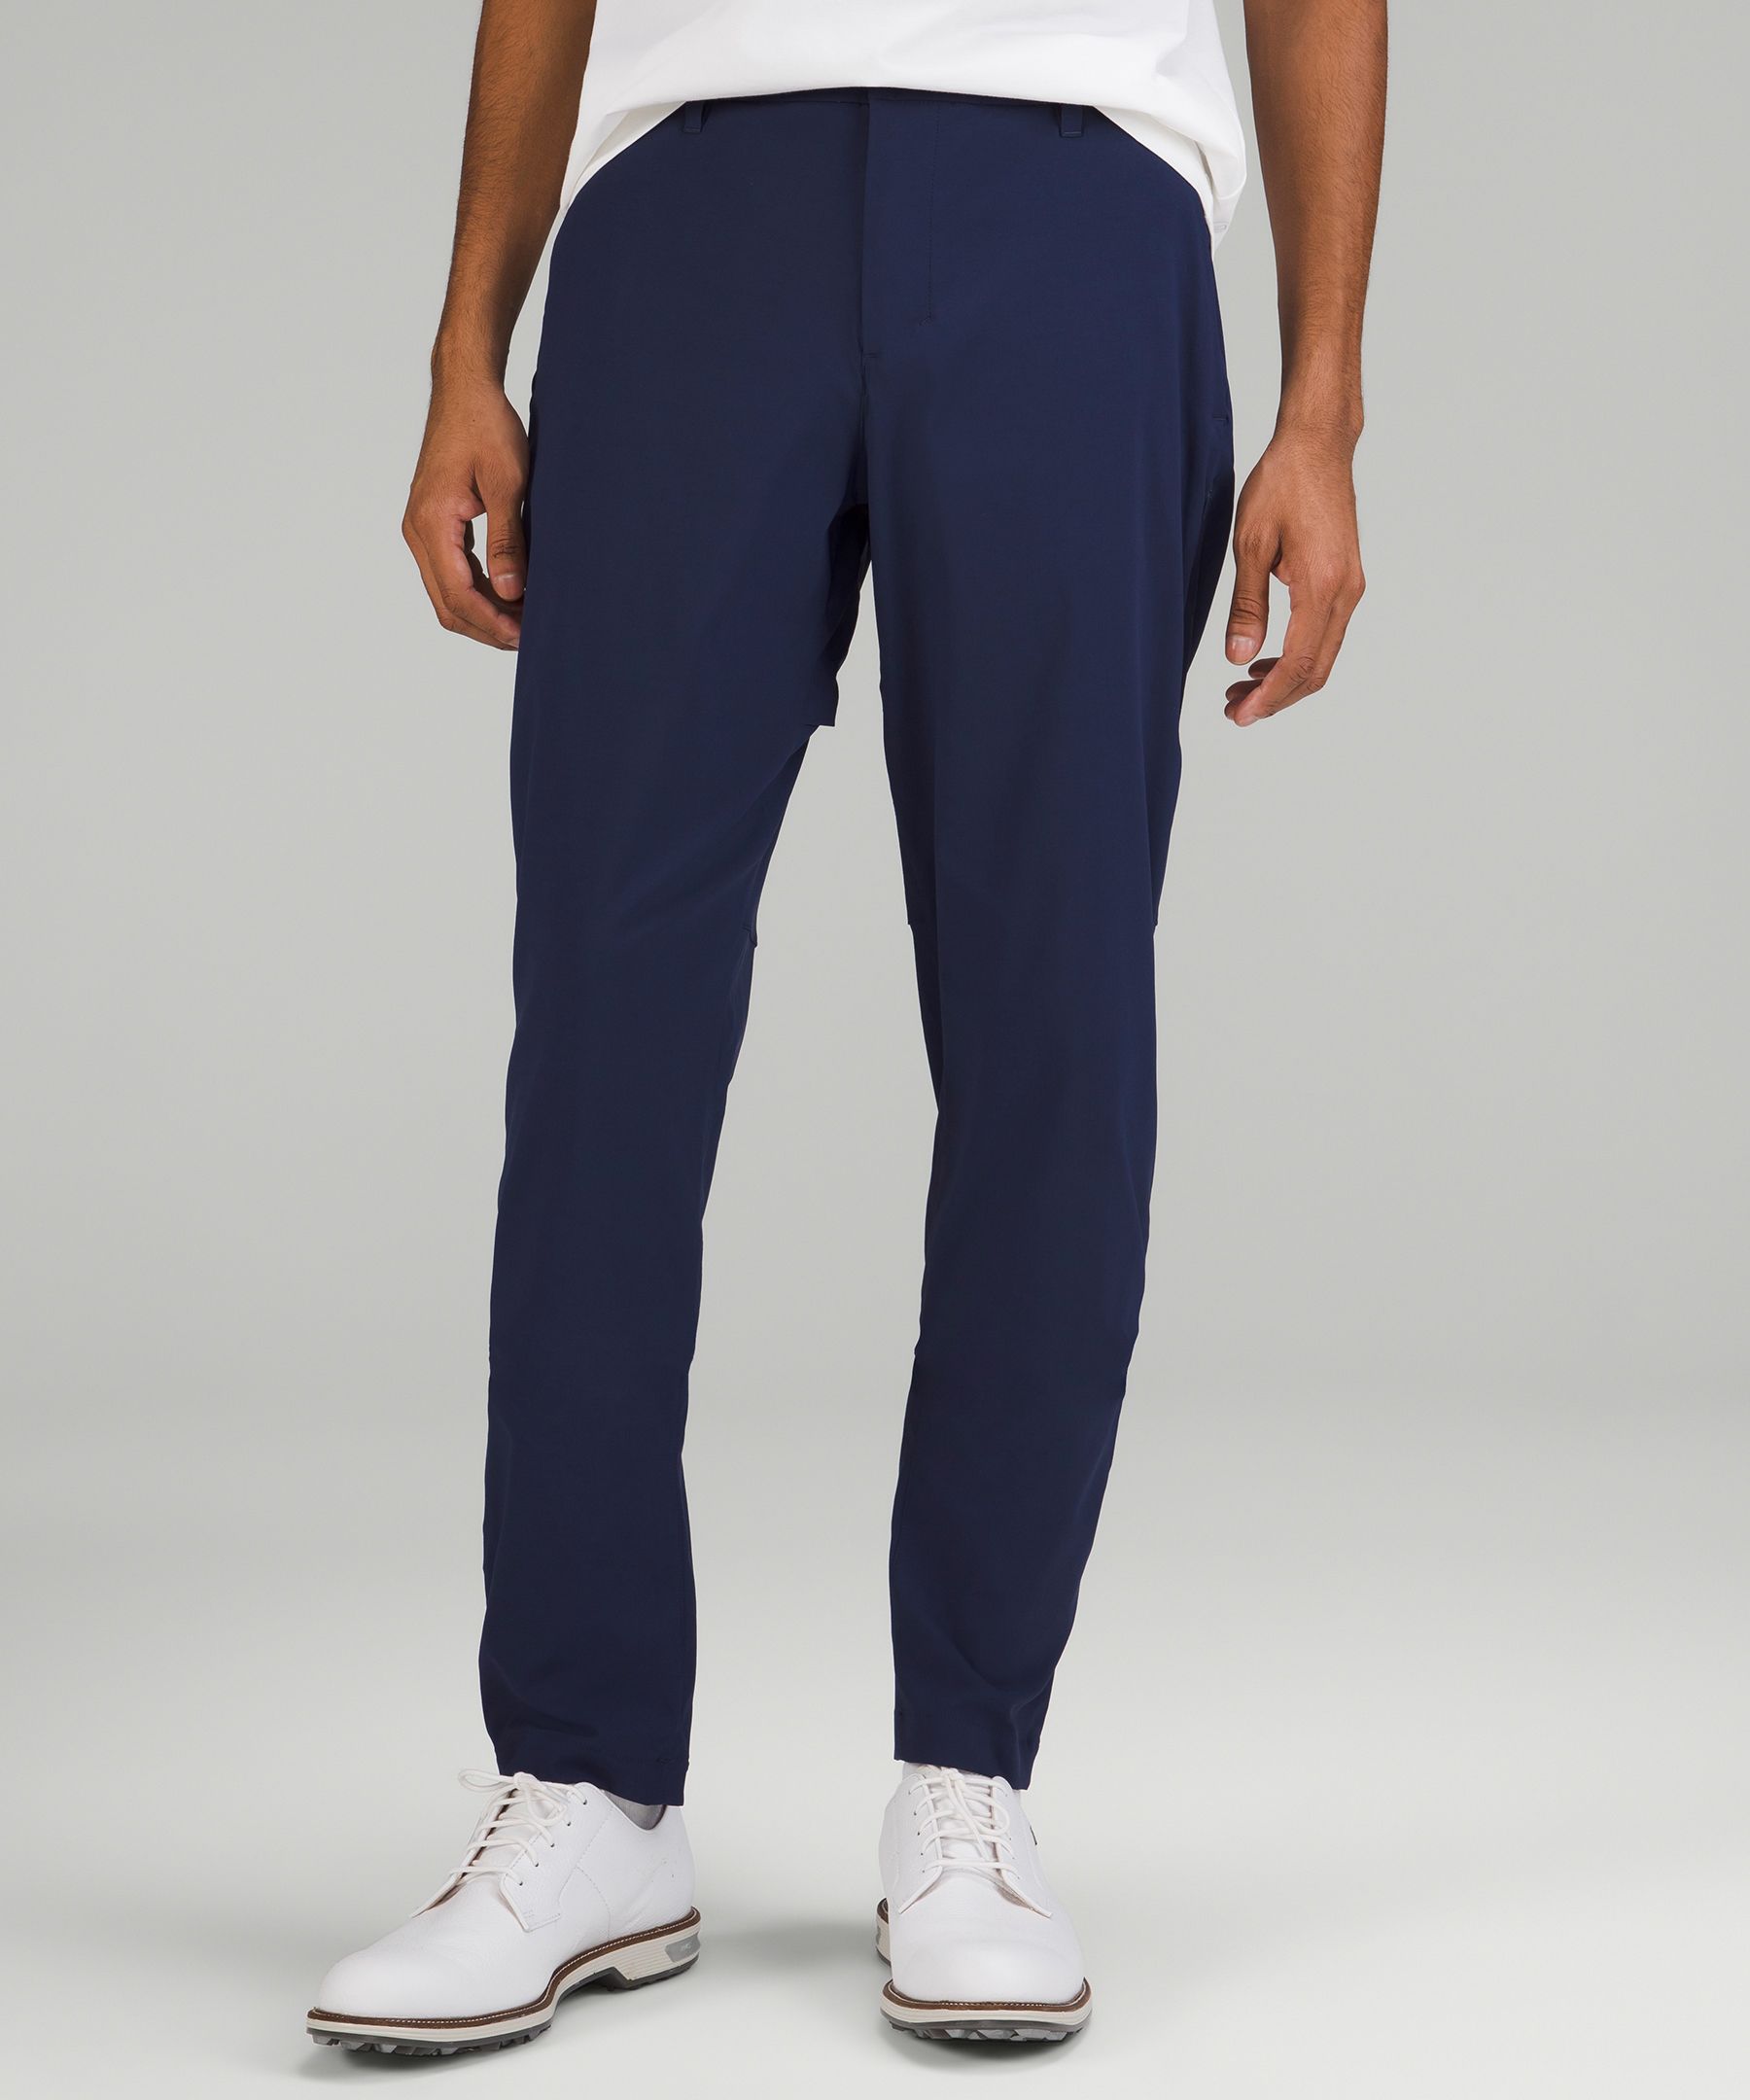 Lululemon Golf Pants Reviews 2020  International Society of Precision  Agriculture